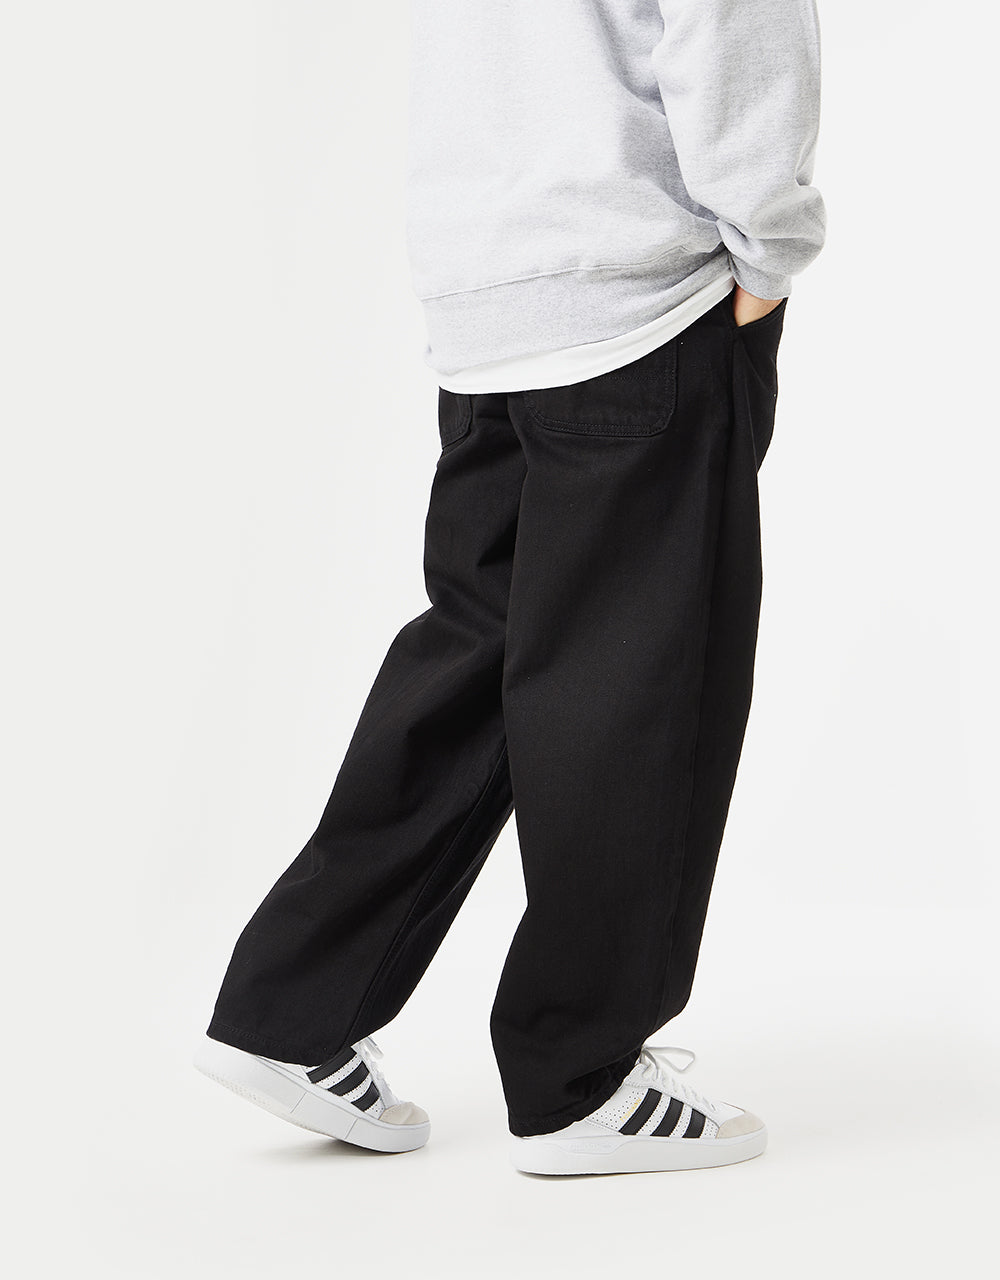 Korean Baggy Pants ⎮ Color Theory Fashion ⎮ Color Theory ⎮ GenZ - Color  Theory